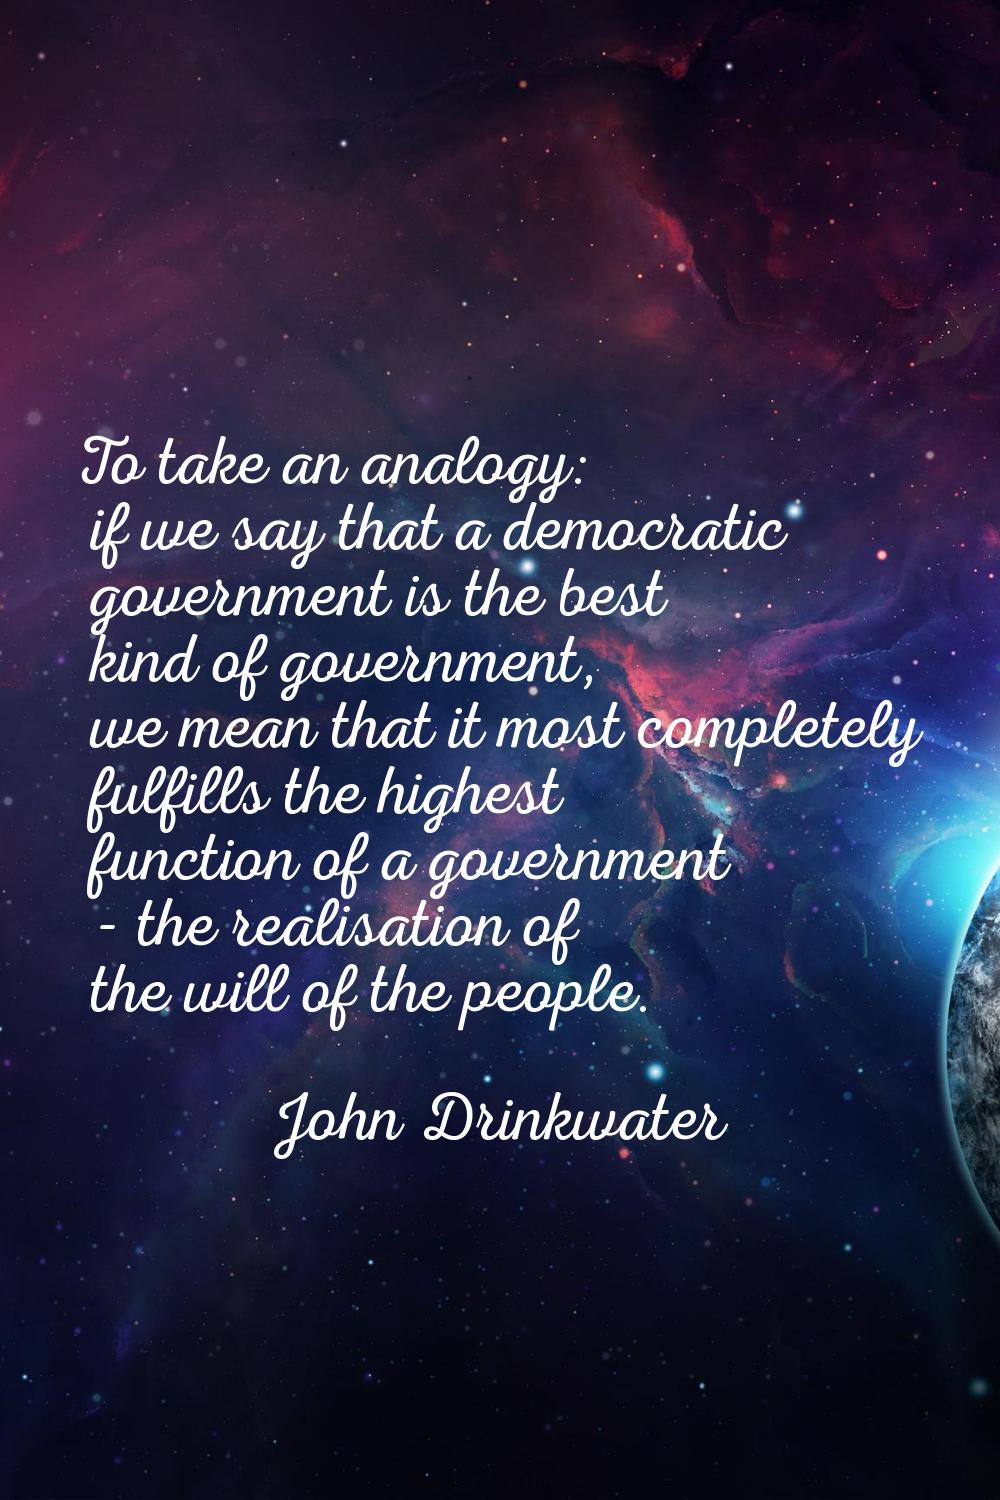 To take an analogy: if we say that a democratic government is the best kind of government, we mean 